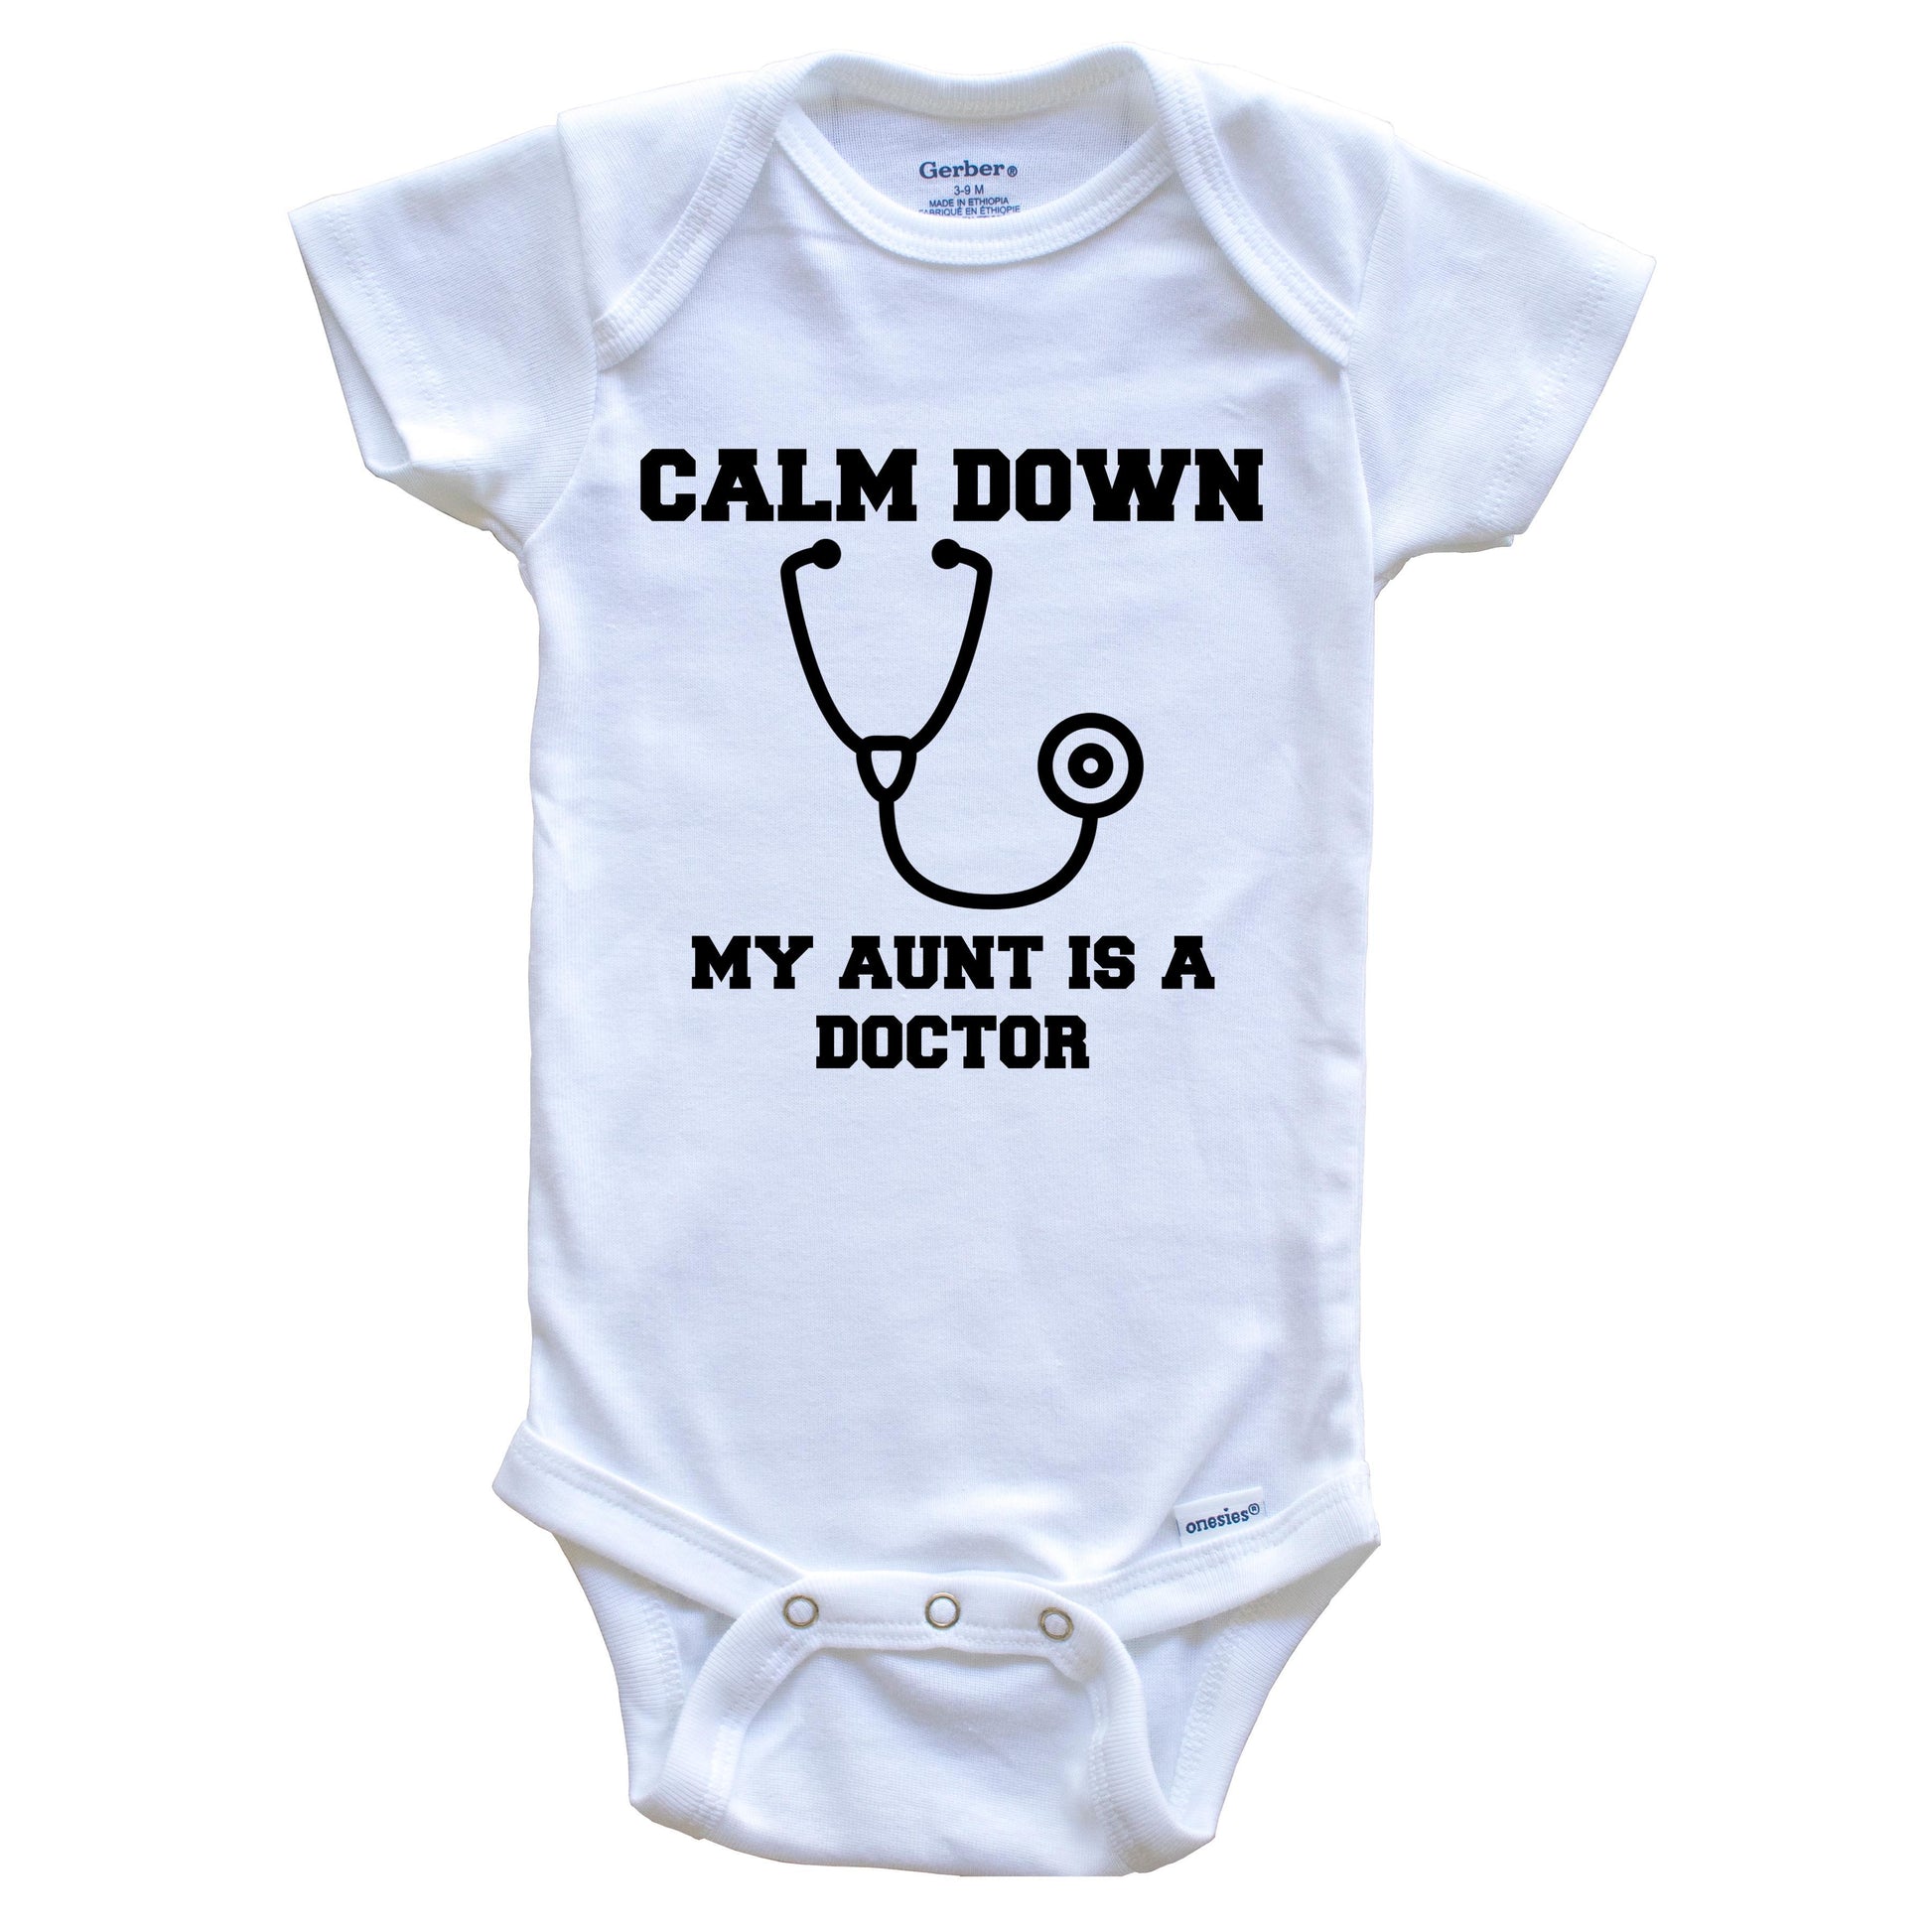 Calm Down My Aunt Is A Doctor Funny Baby Onesie - One Piece Baby Bodysuit